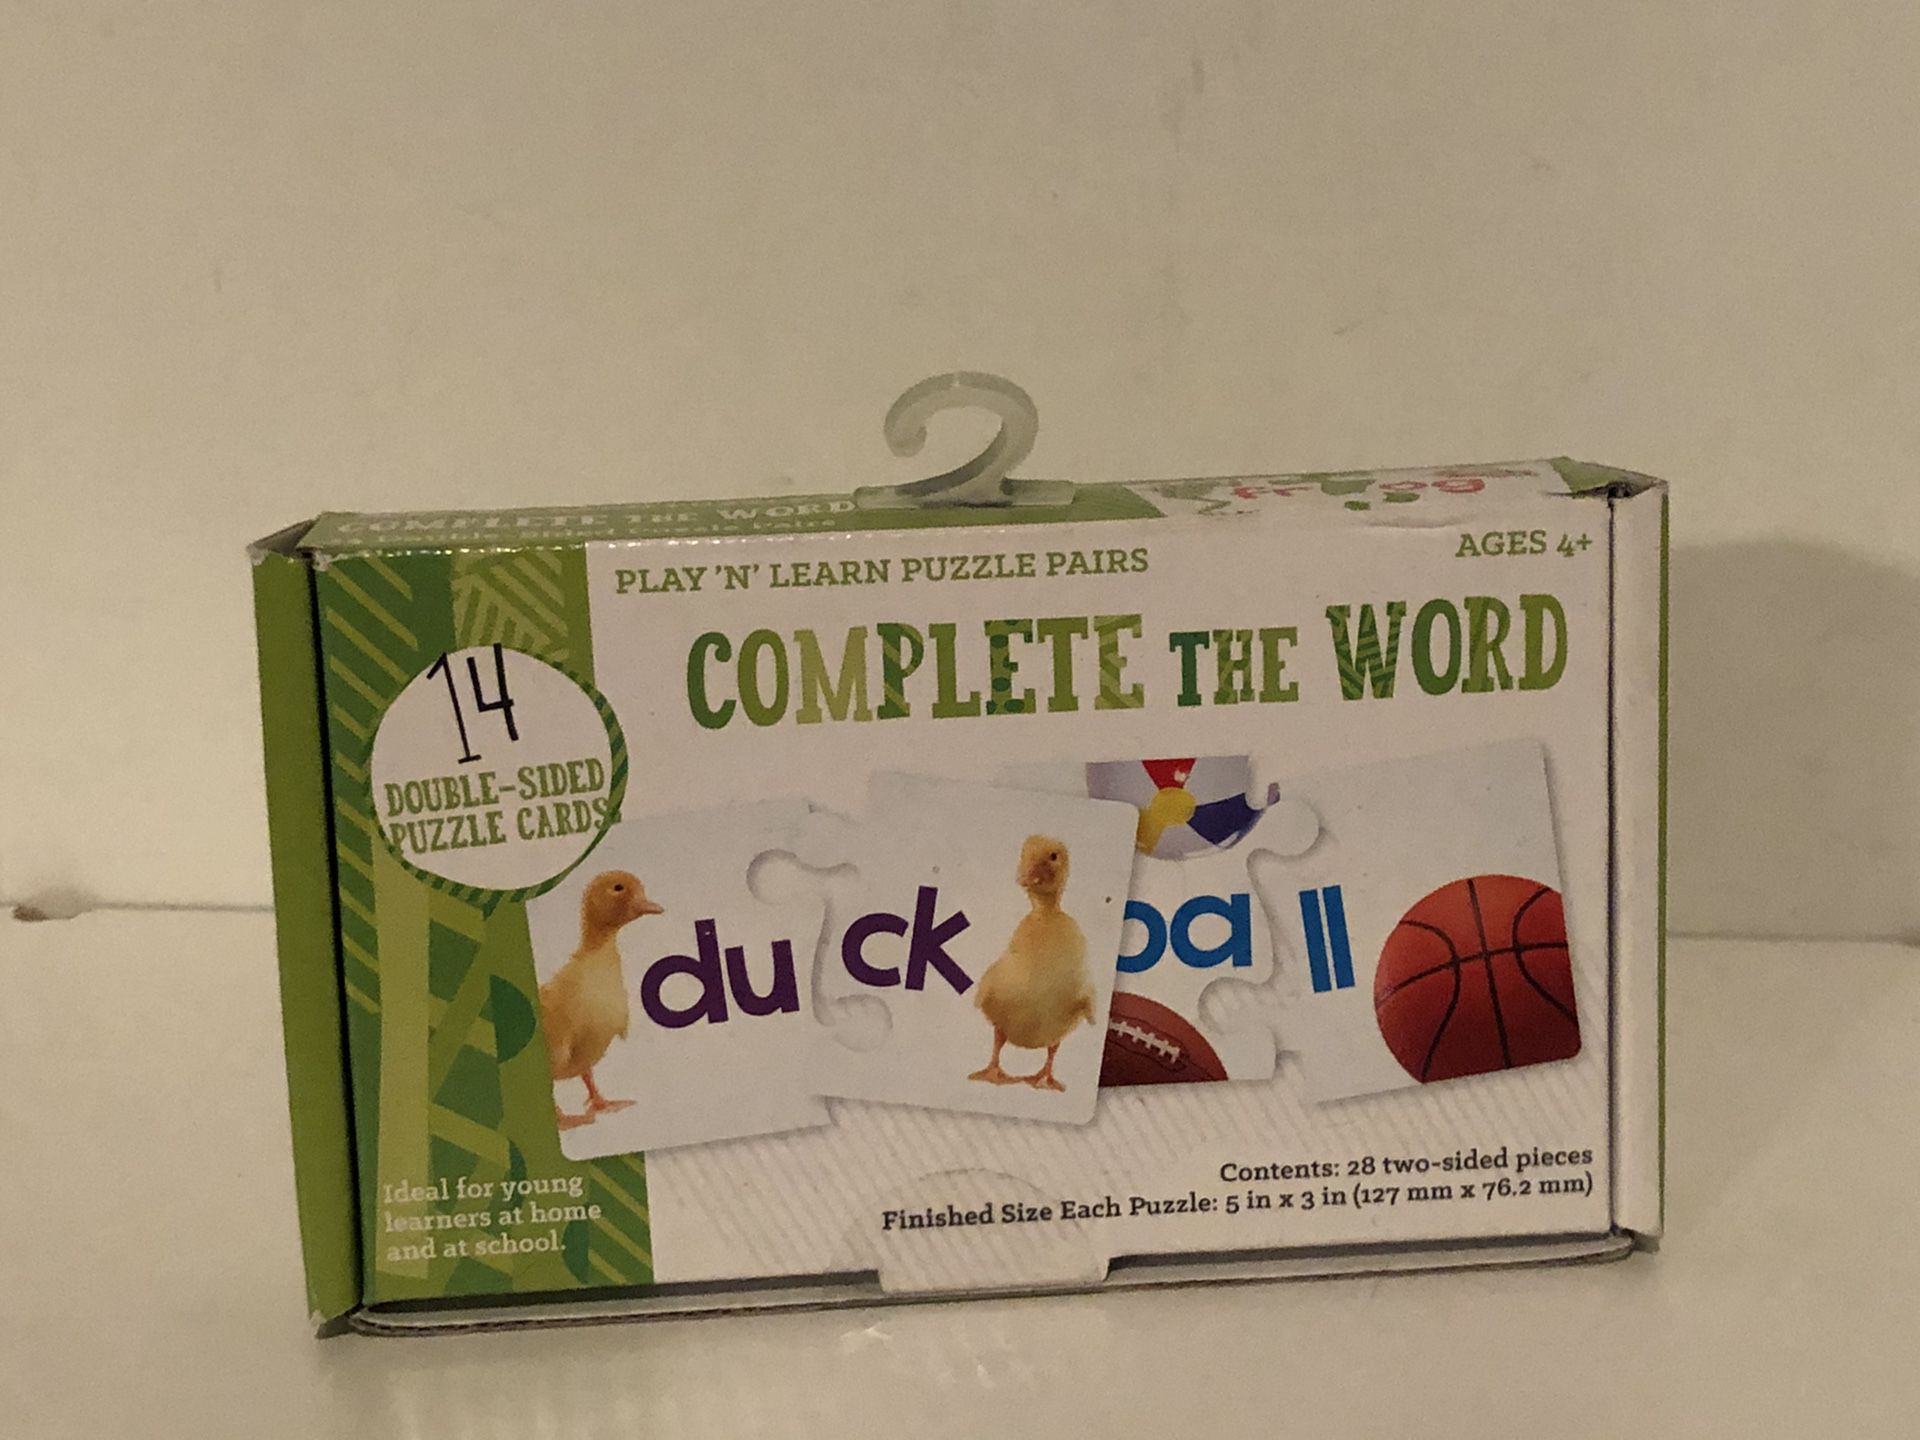 Sealed new Complete the Word play n learn puzzle pairs 14 double sided cards - kids learning game